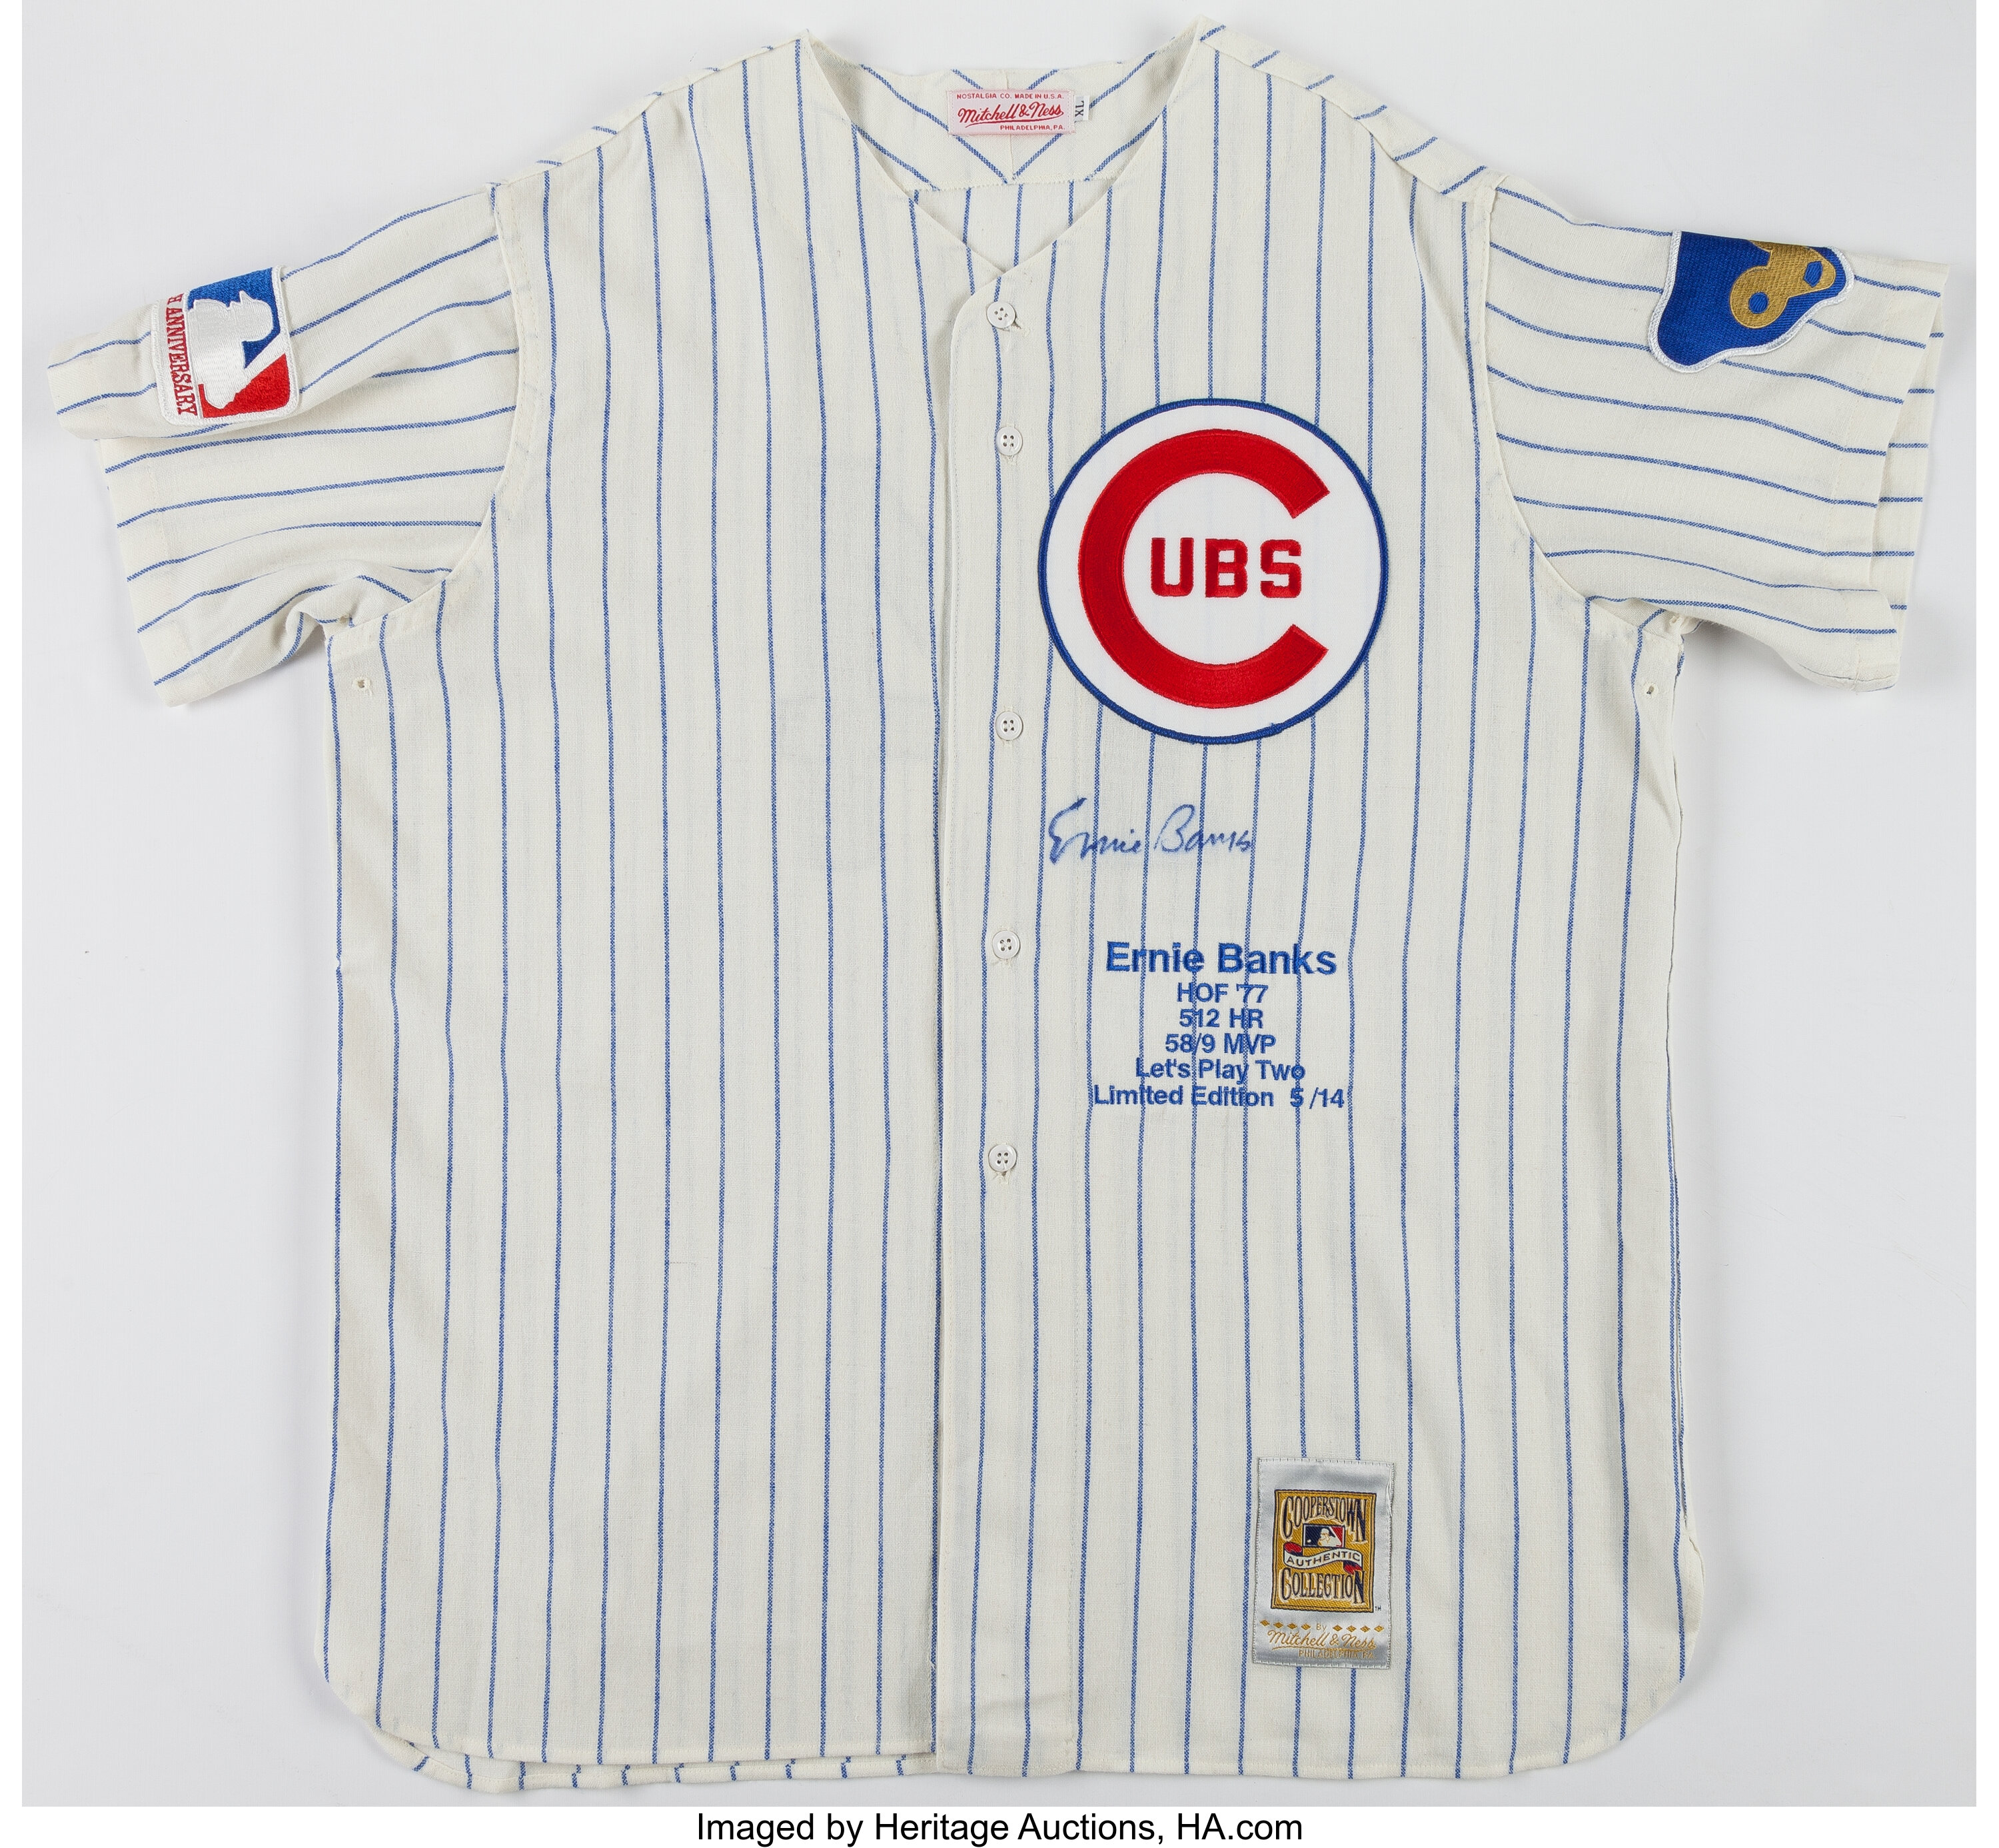 Sold at Auction: TWO SIGNED CHICAGO CUBS JERSEYS